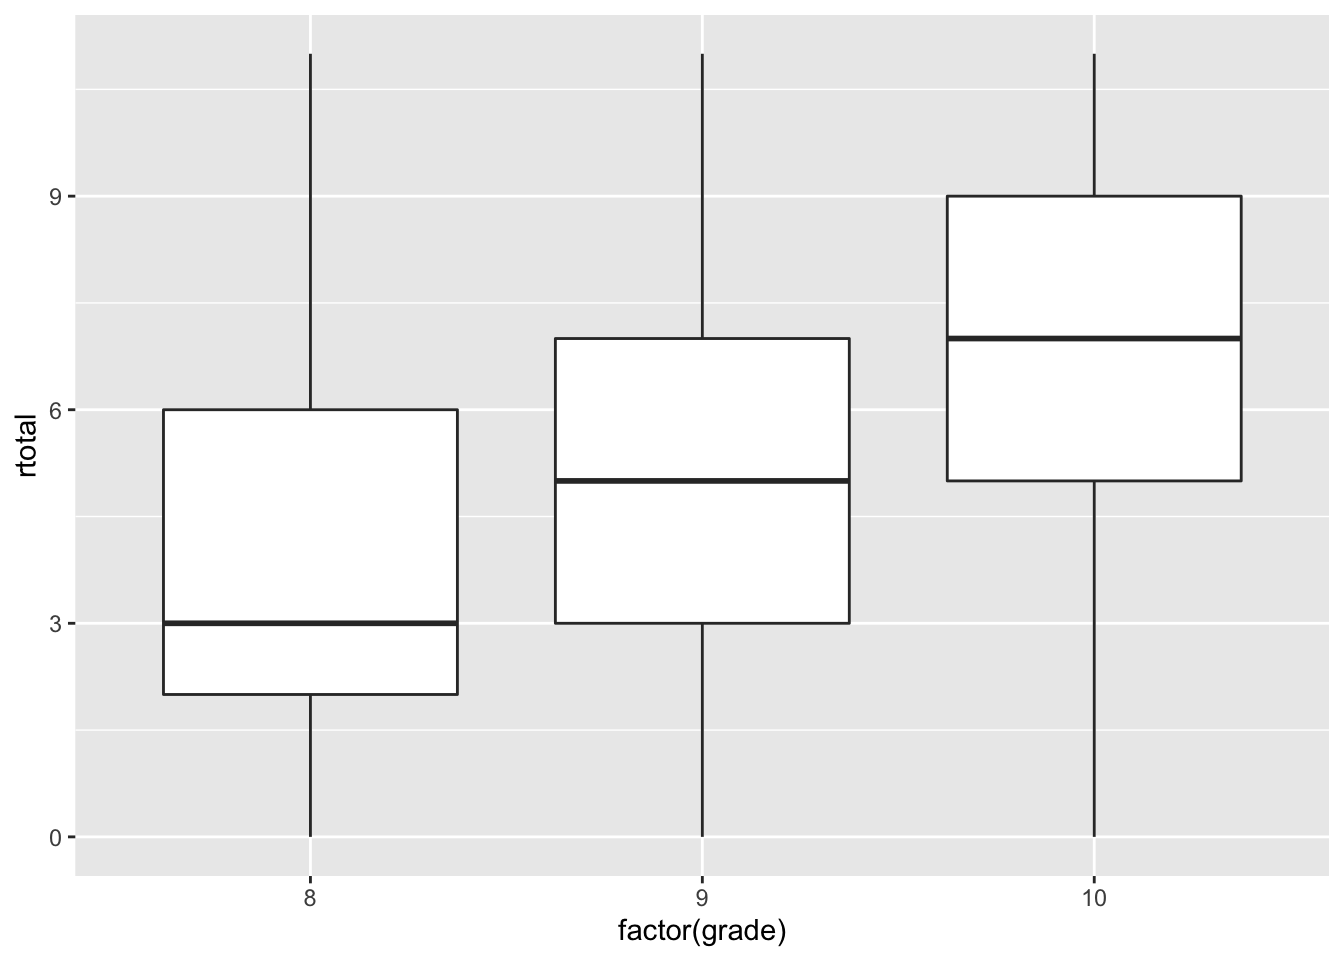 Bar plots of total scores on PISA09 scored reading items for Germany by grade.